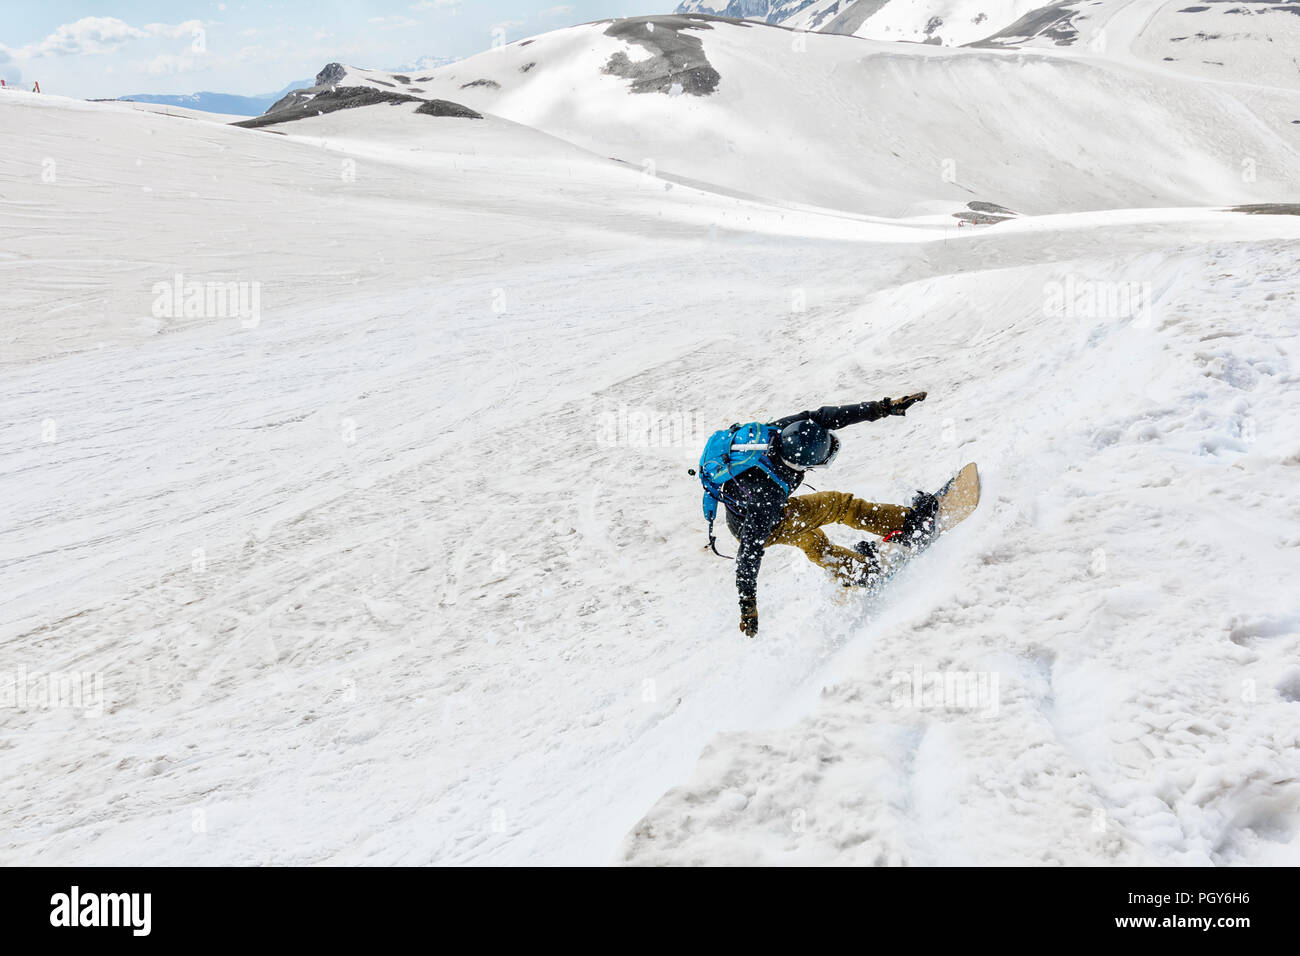 A freeride snowboarder jump from a cliff and makes his trick Stock Photo